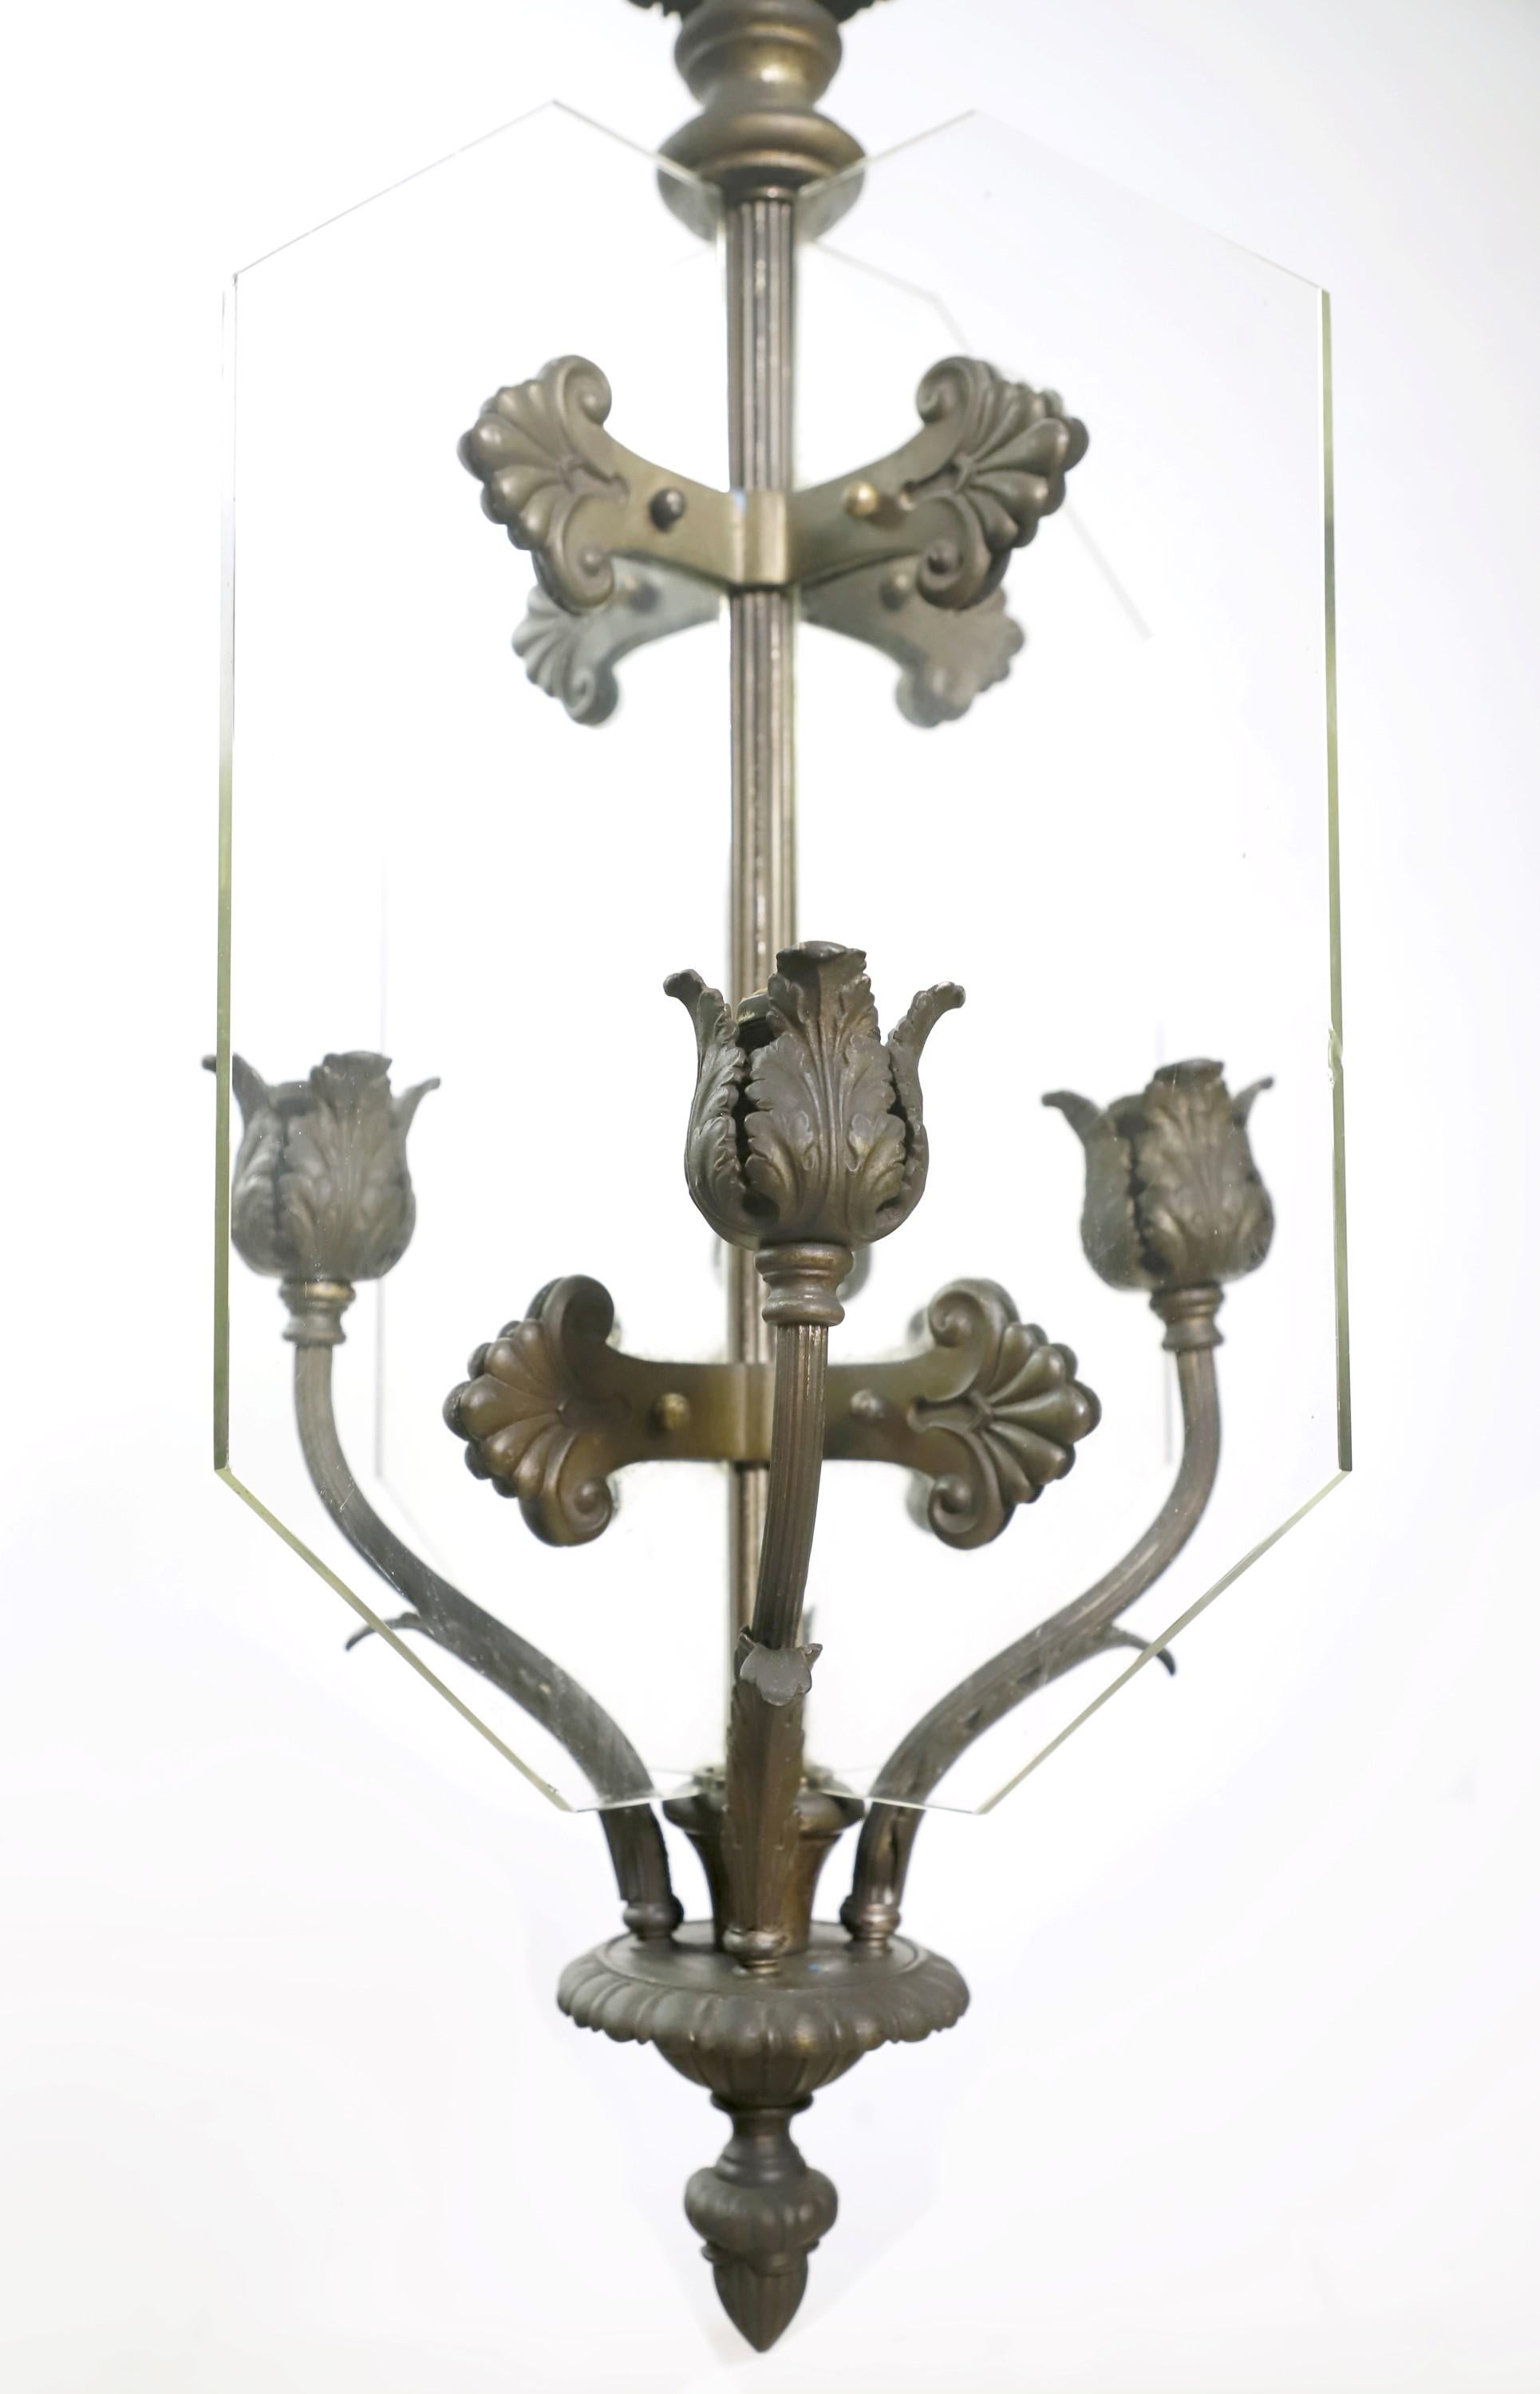 Early 20th century bronze pendant chandelier in a Classic Beaux Arts design. Each of the four standard medium bass sockets are separated by glass panels. Comes with original canopy. This light will be cleaned and rewired before shipping. Please